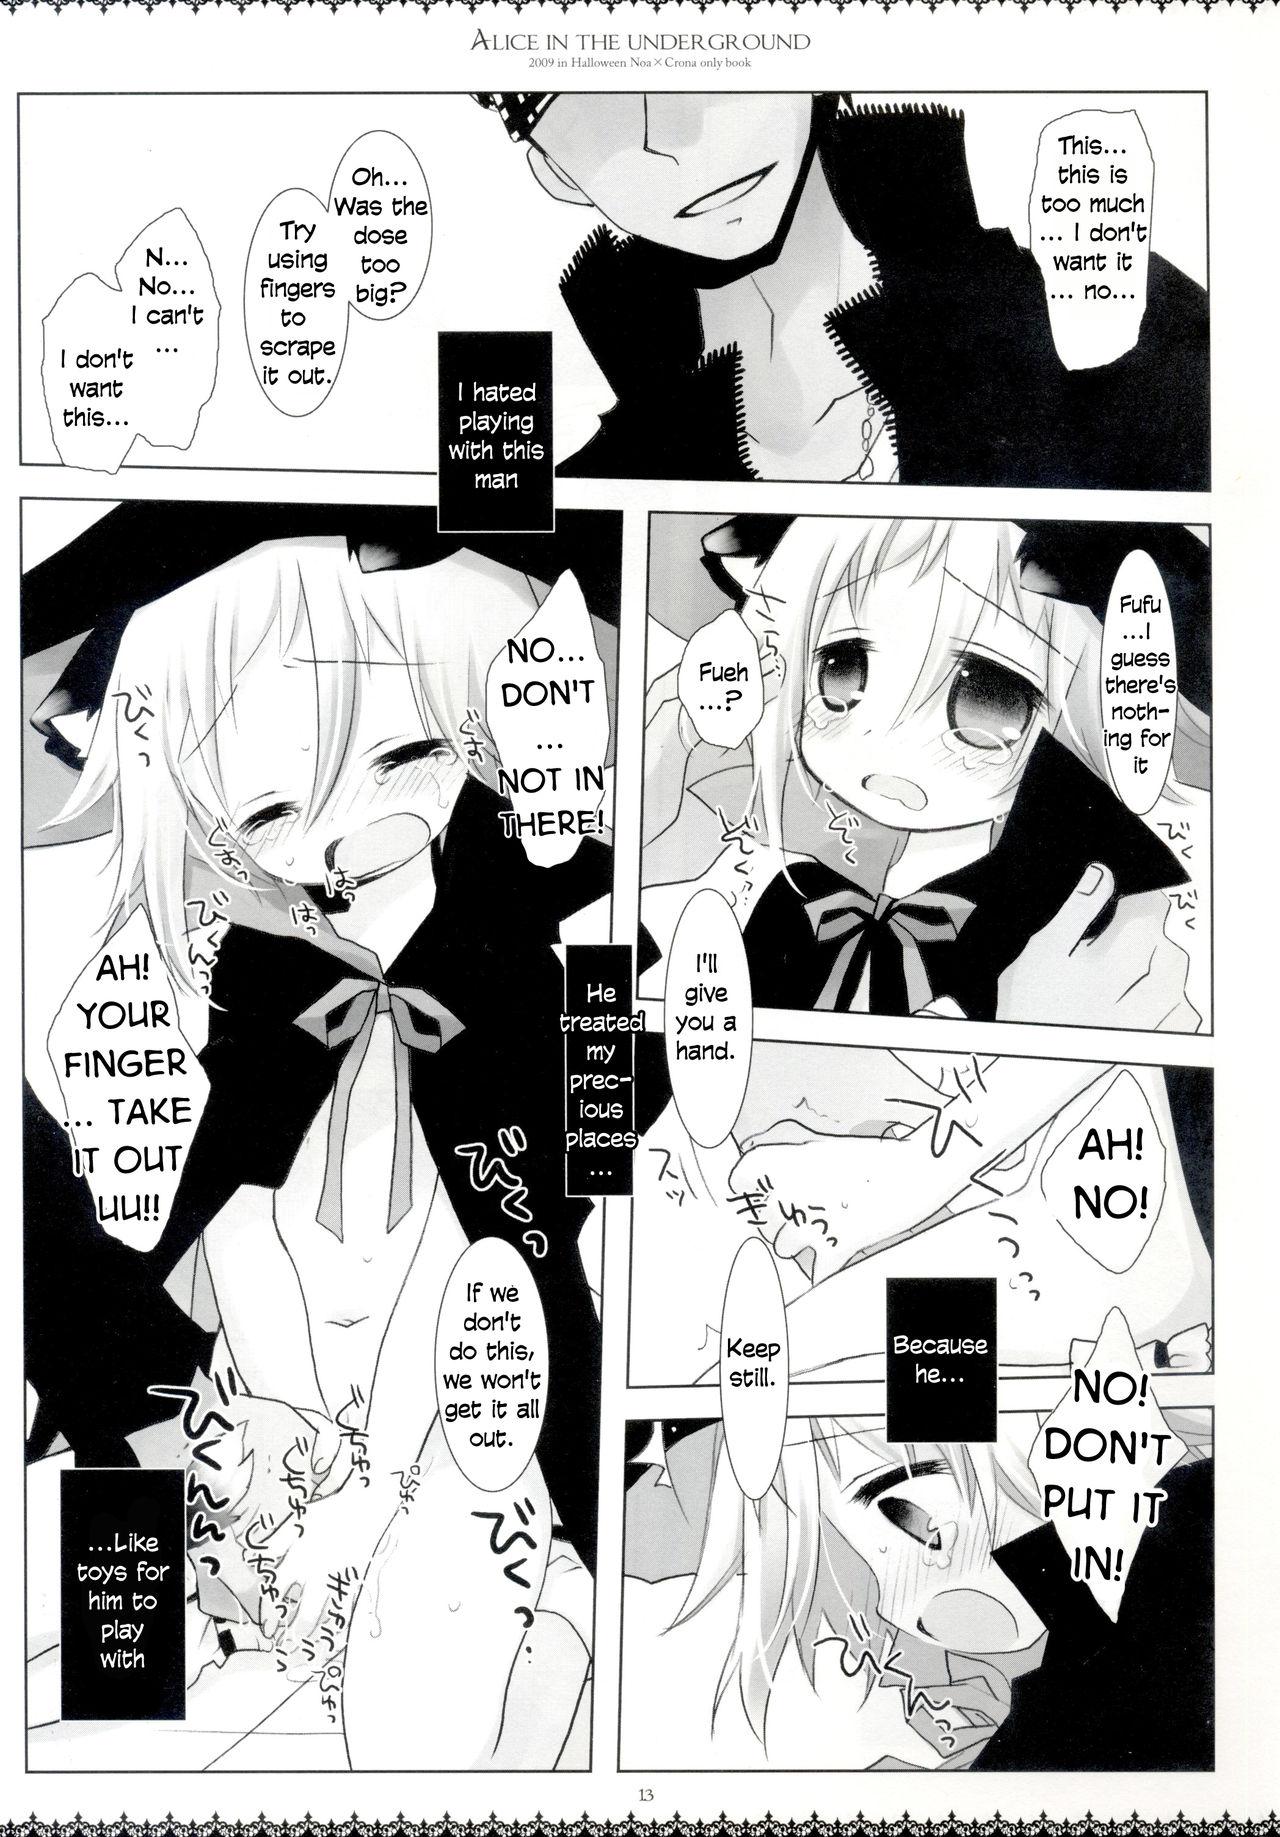 Wanking Alice in the underground - Soul eater Footjob - Page 12